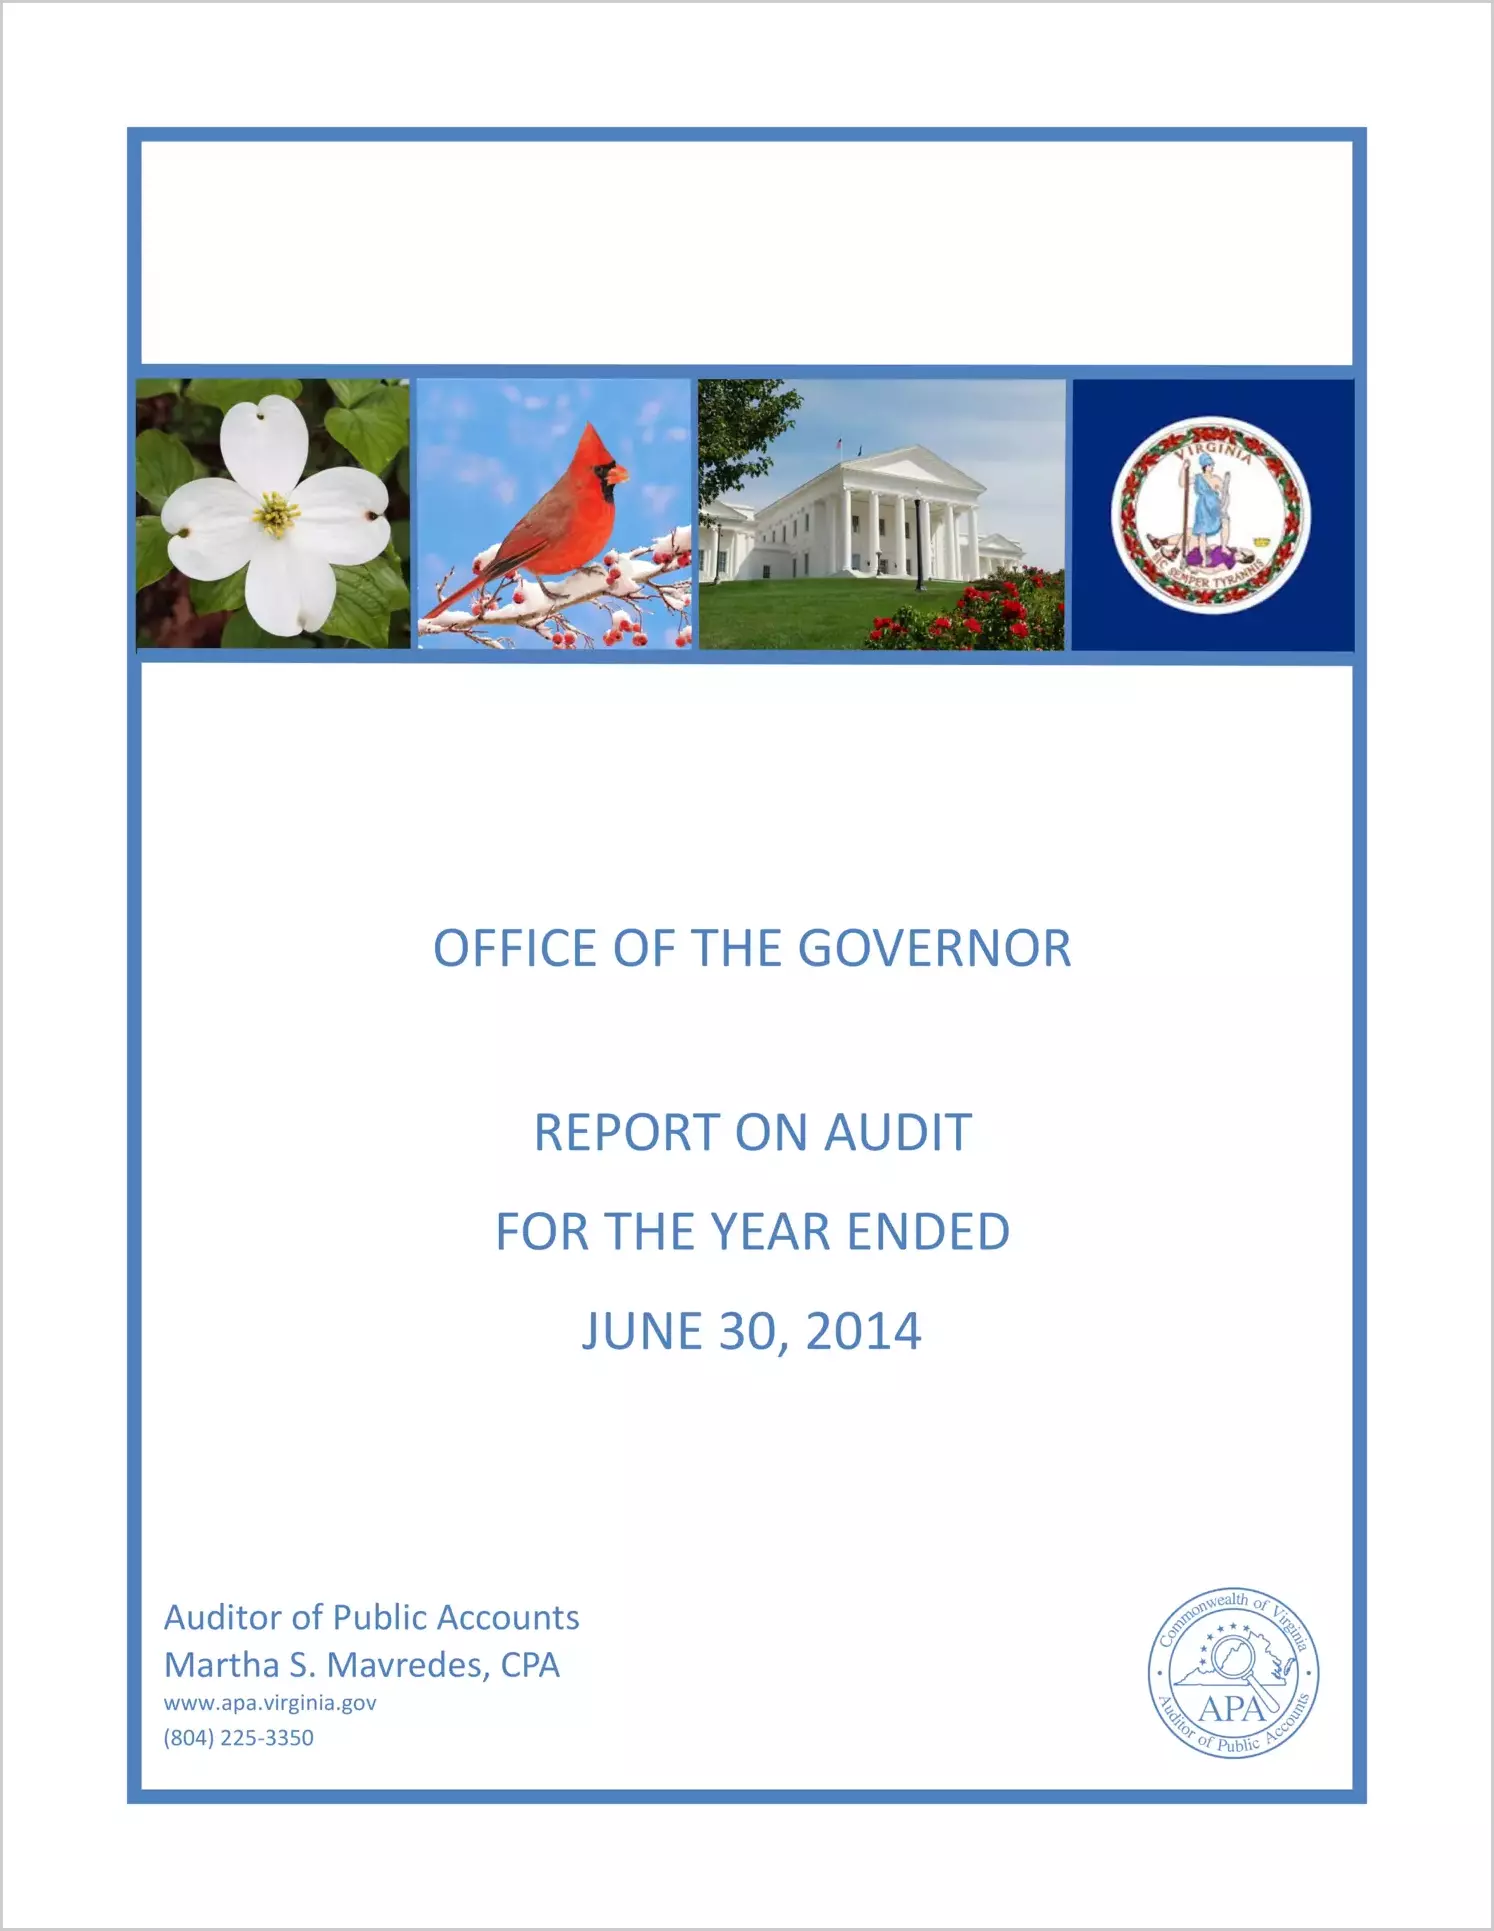 Office of the Governor for the year ended June 30, 2014